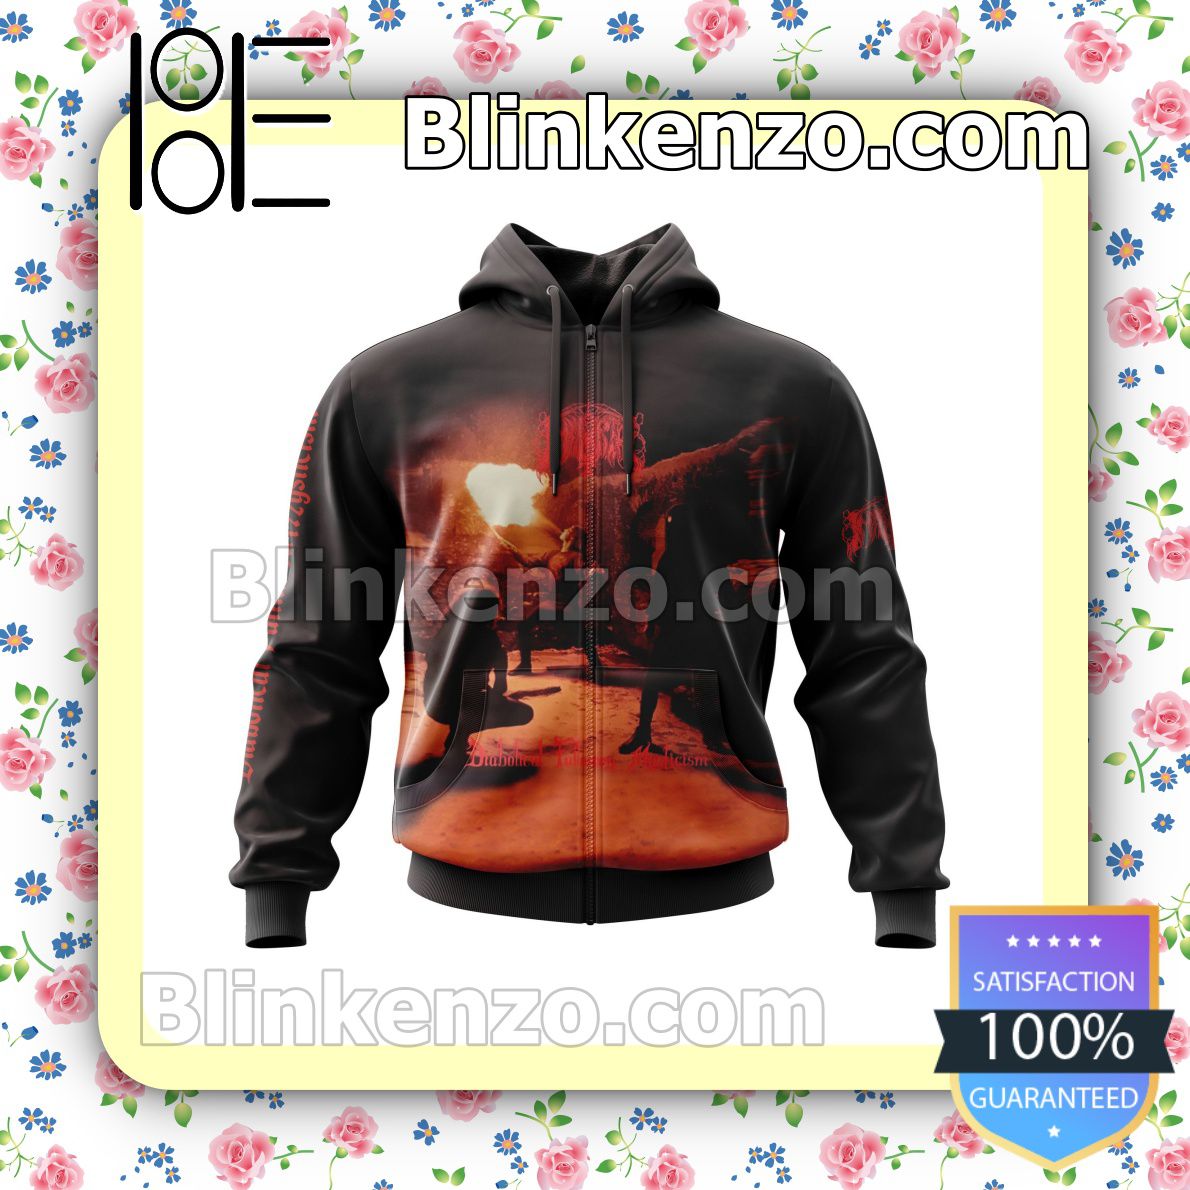 Personalized Immortal Diabolical Fullmoon Mysticism Album Cover Hooded Sweatshirt